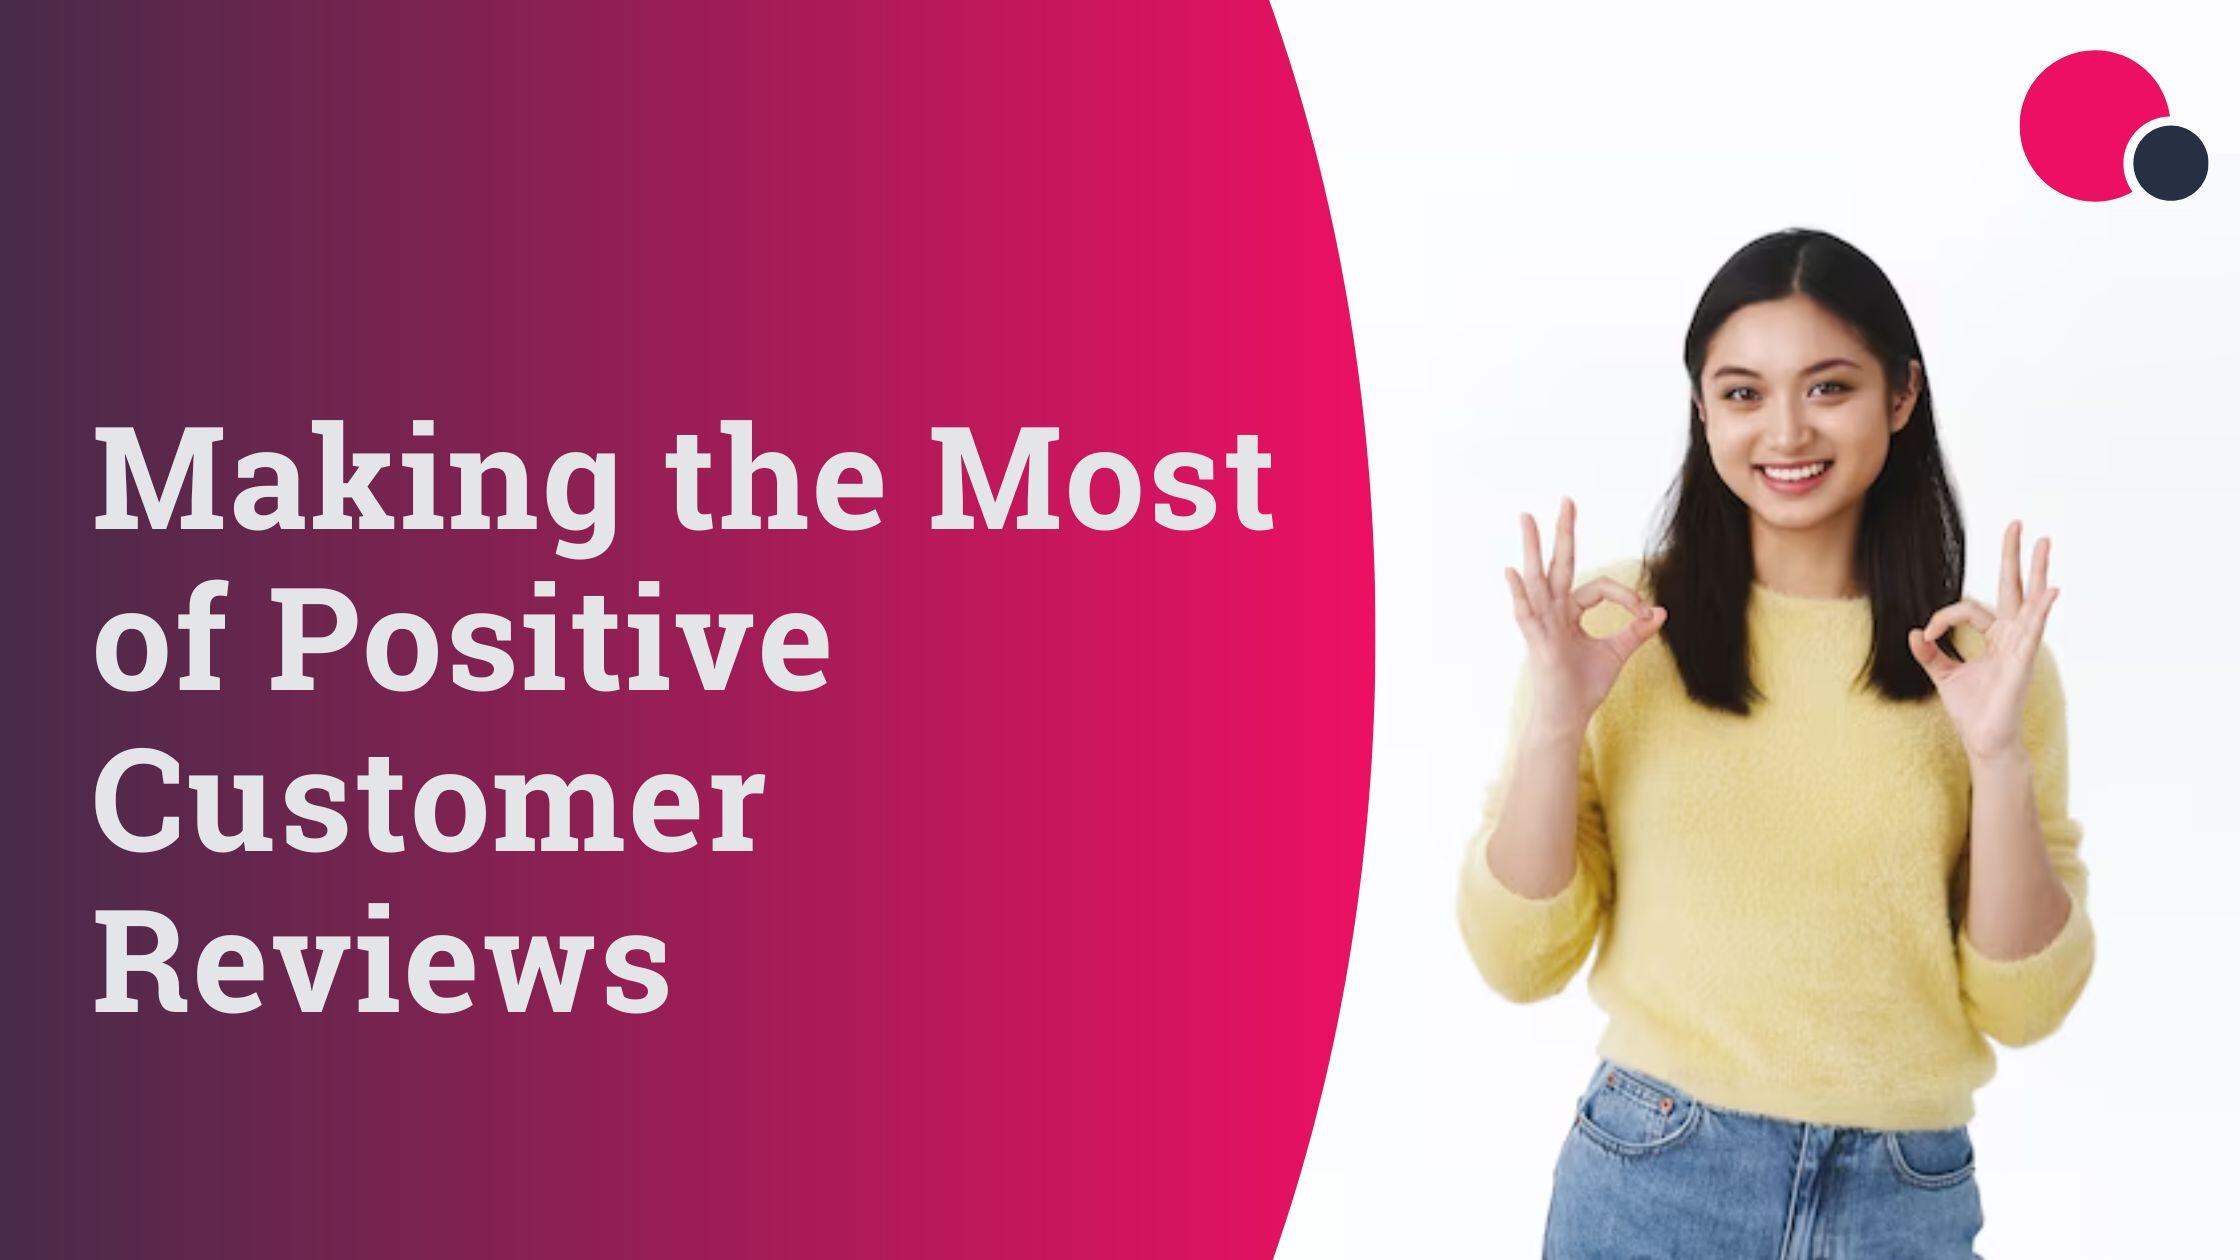 Making the Most of Positive Customer Reviews